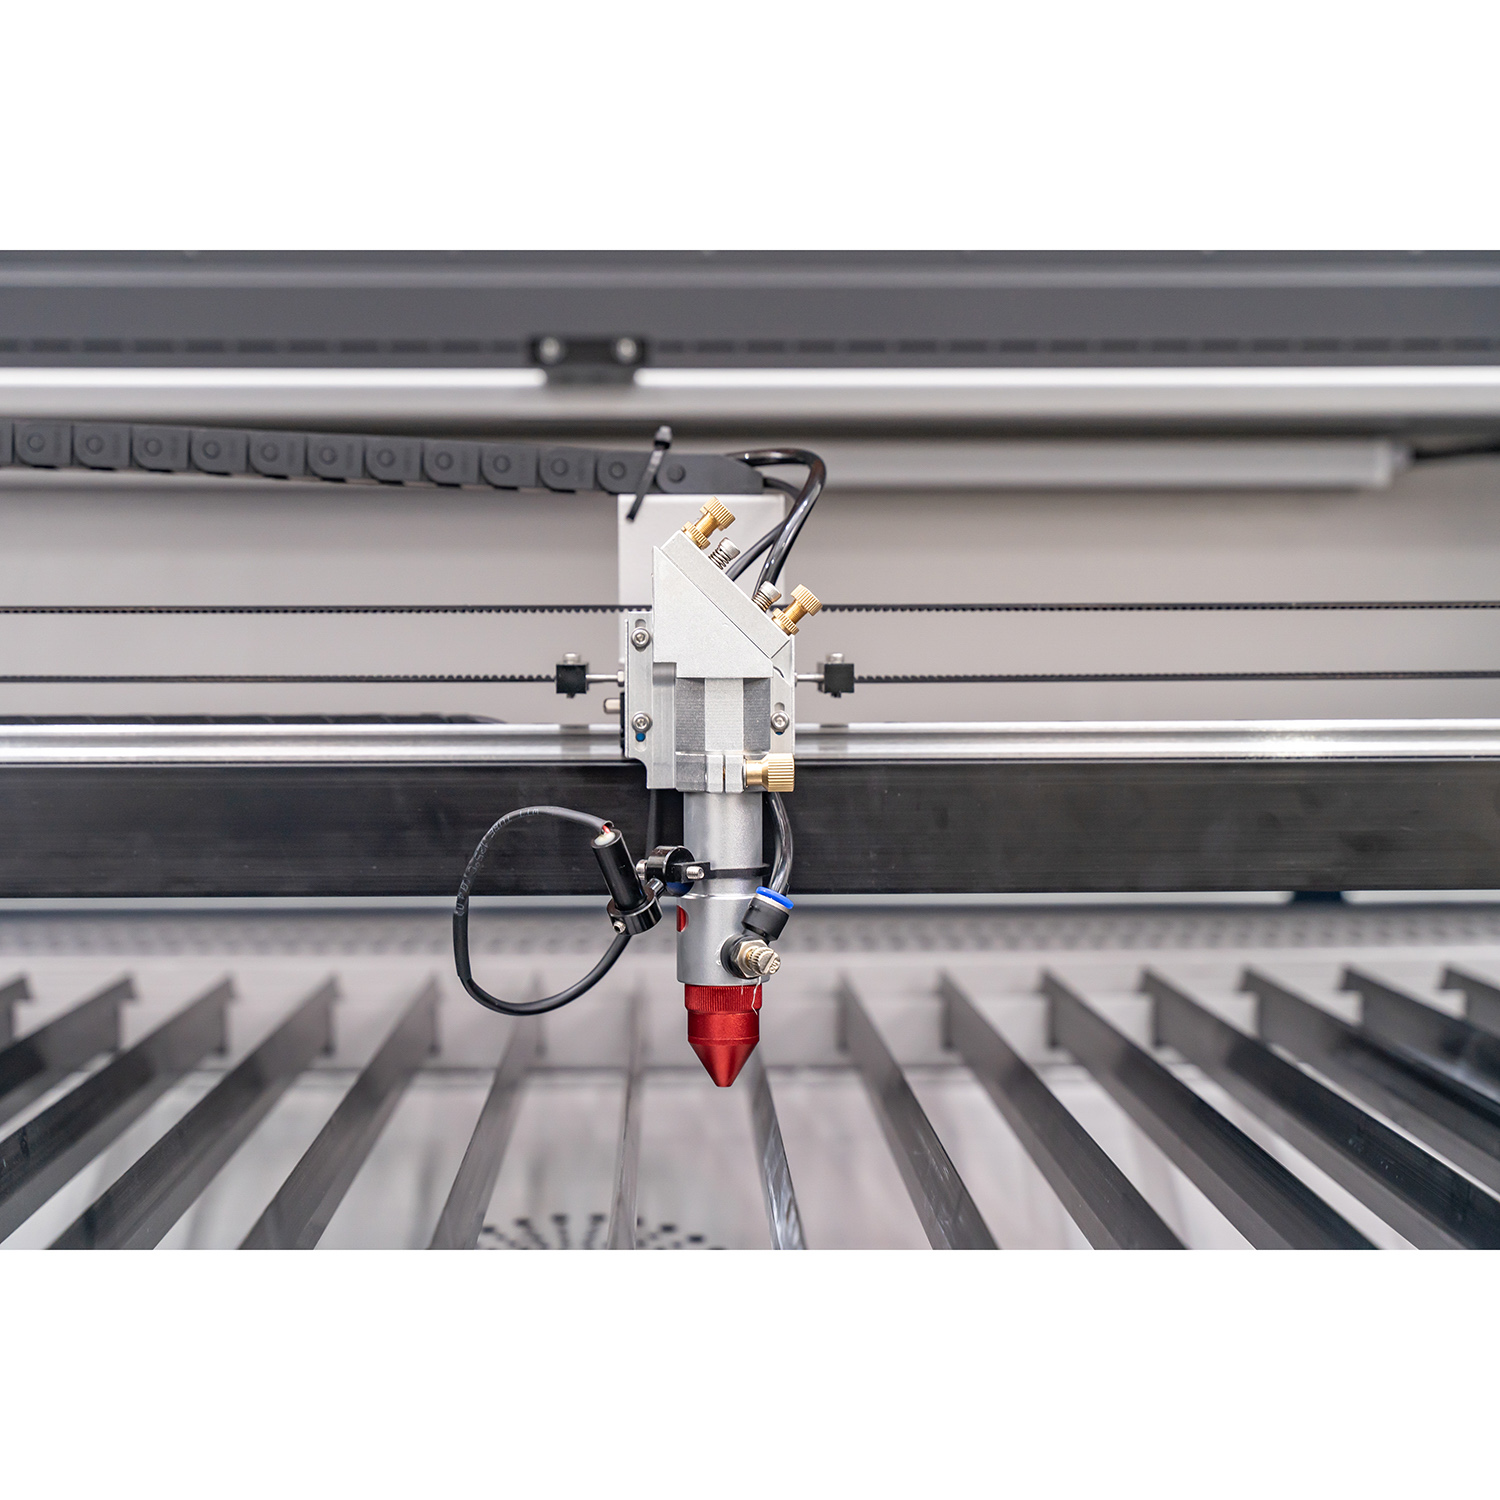 Easy Automation Equipment Co., Ltd. releases exclusive design of CO2 cutting machine laser head, making it easier to replace the focusing lens